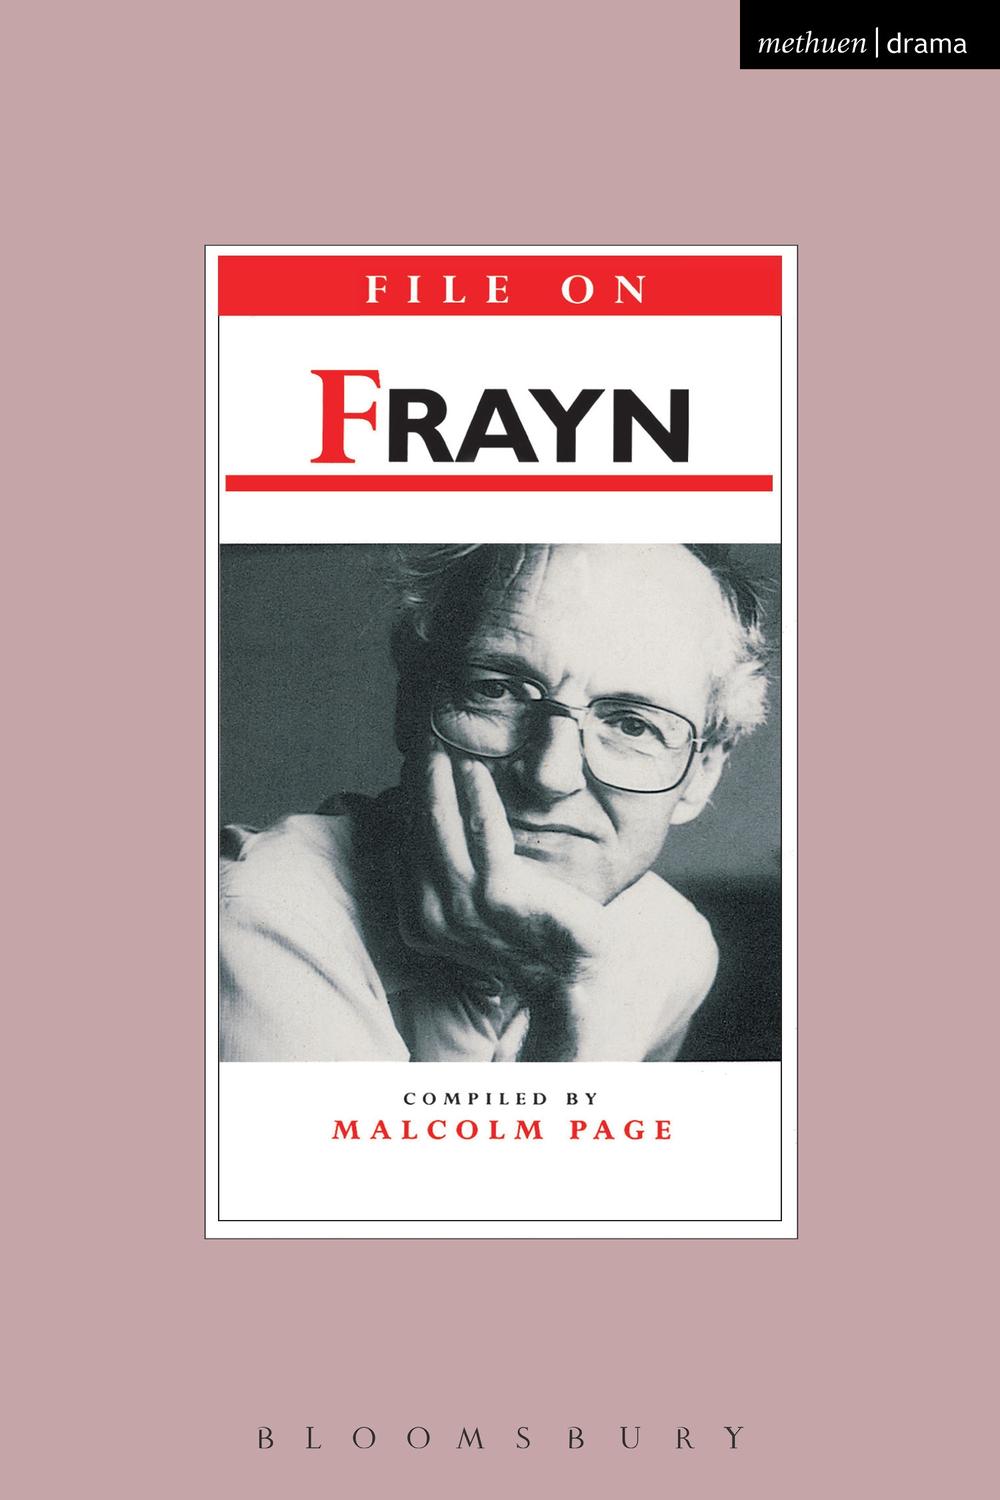 File On Frayn - Malcolm Page